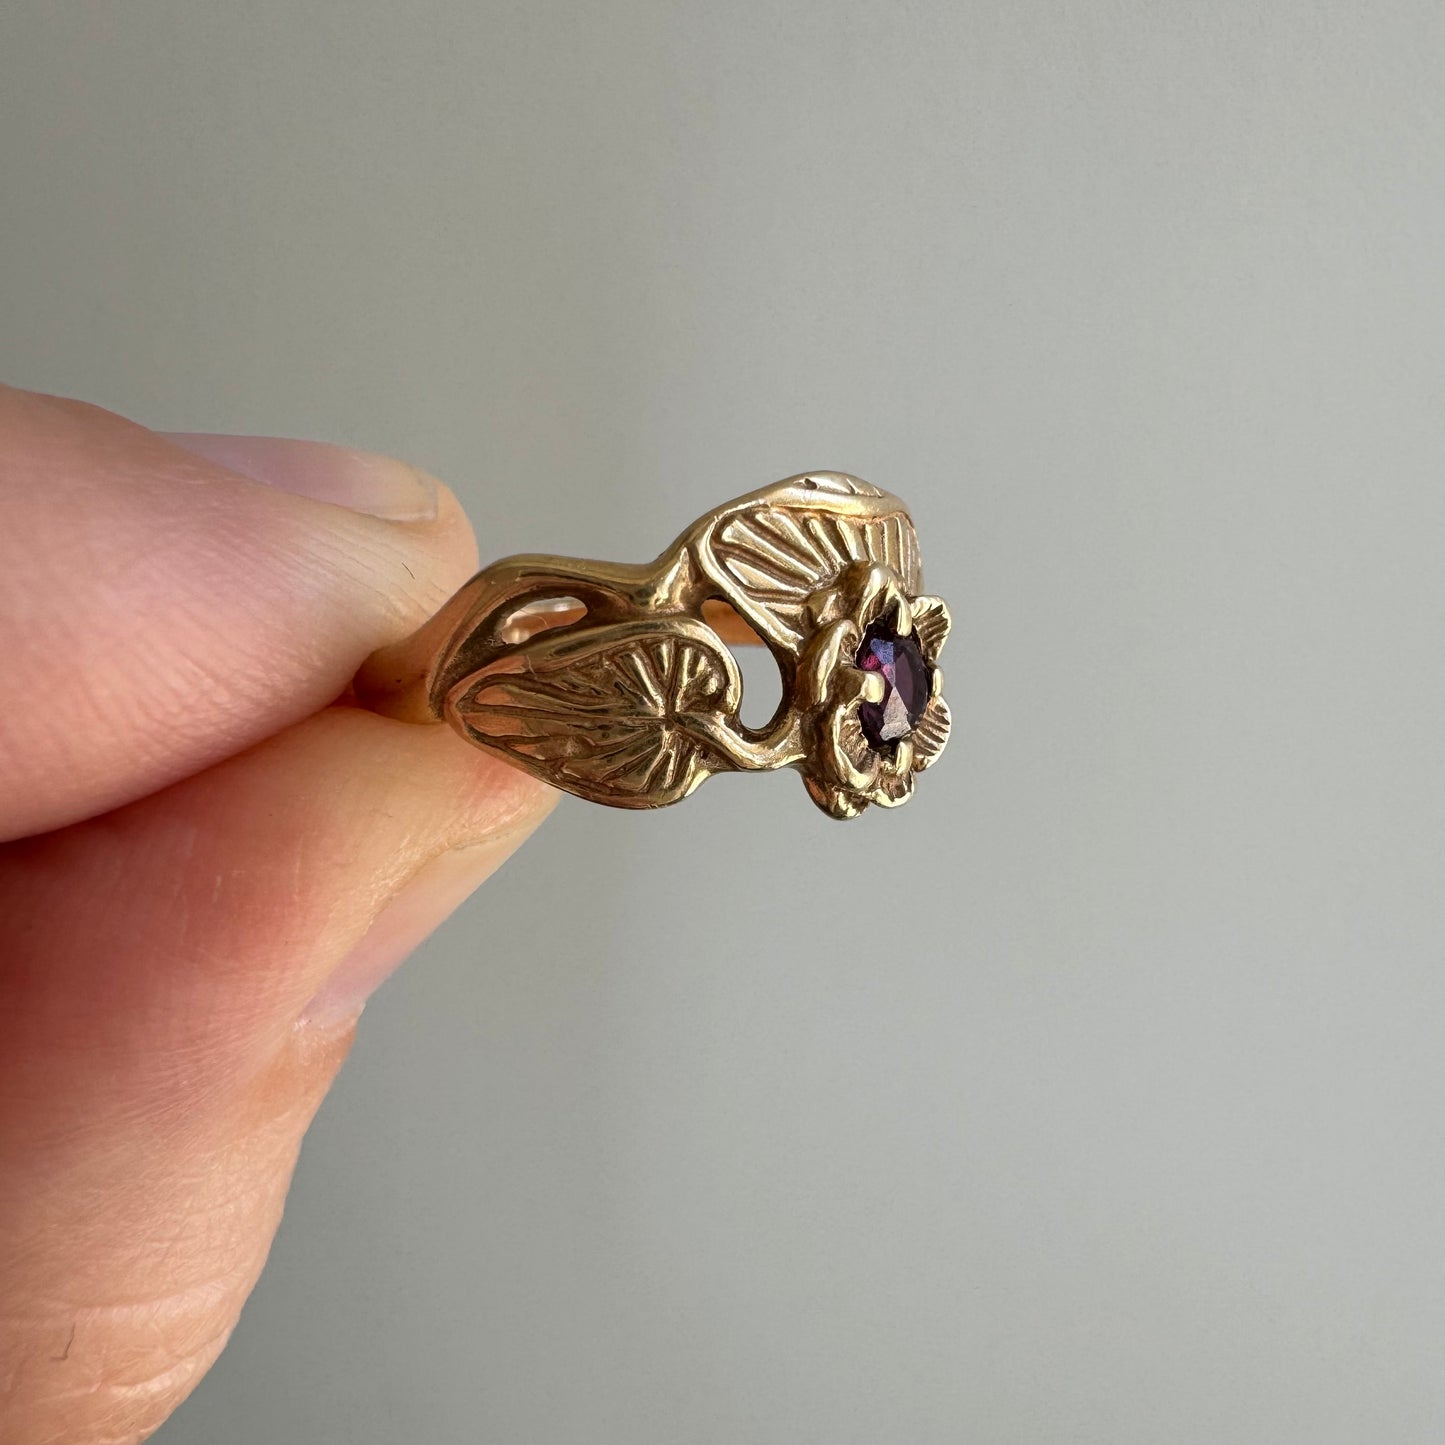 V I N T A G E // like a waterlily / 14k and rhodolite garnet floral ring / size 5.5